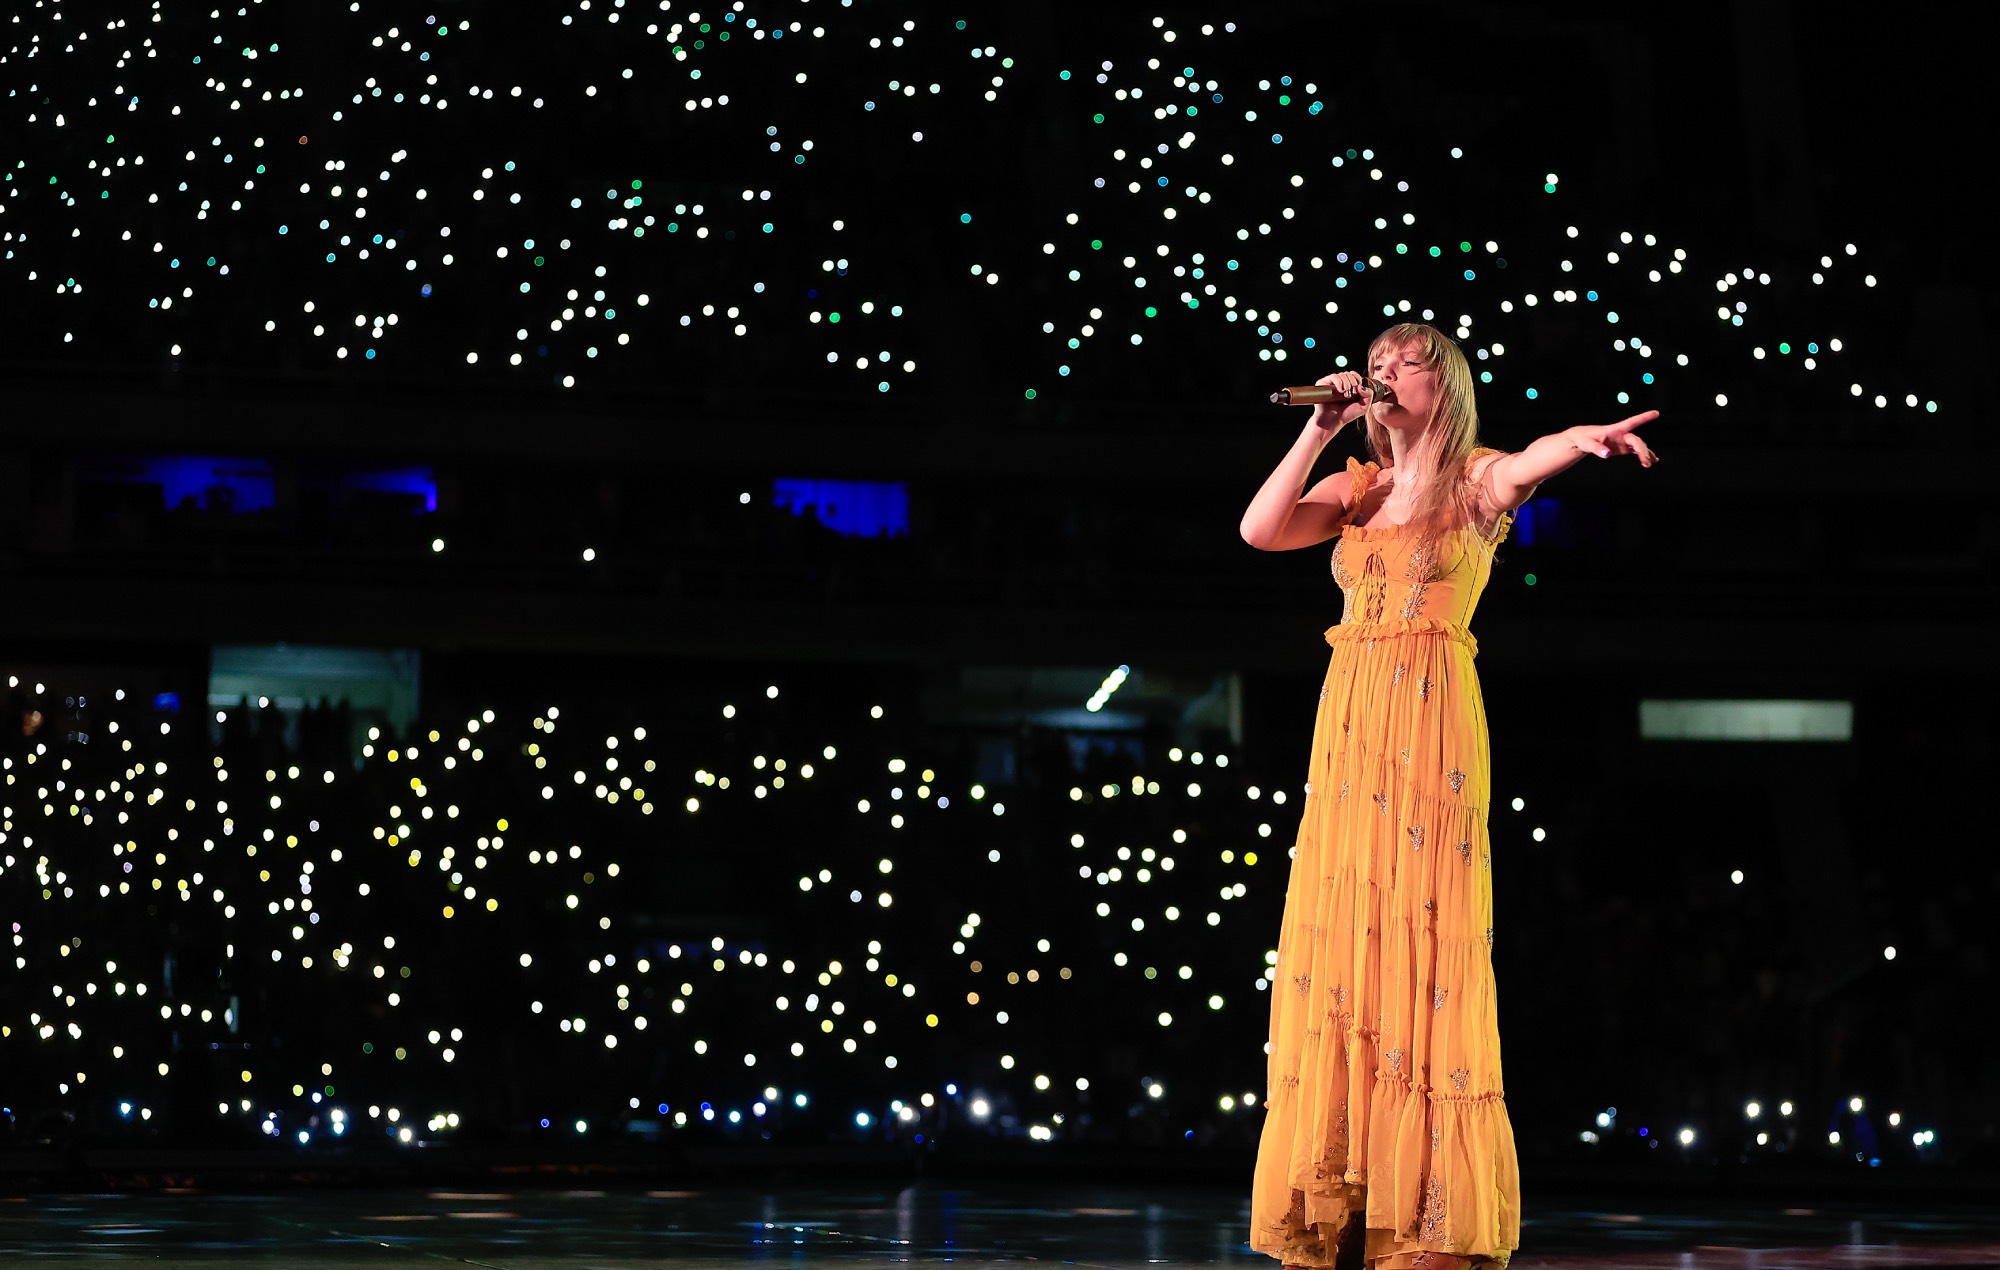 Taylor Swift says she’s “devastated” by death of fan before concert show in Brazil